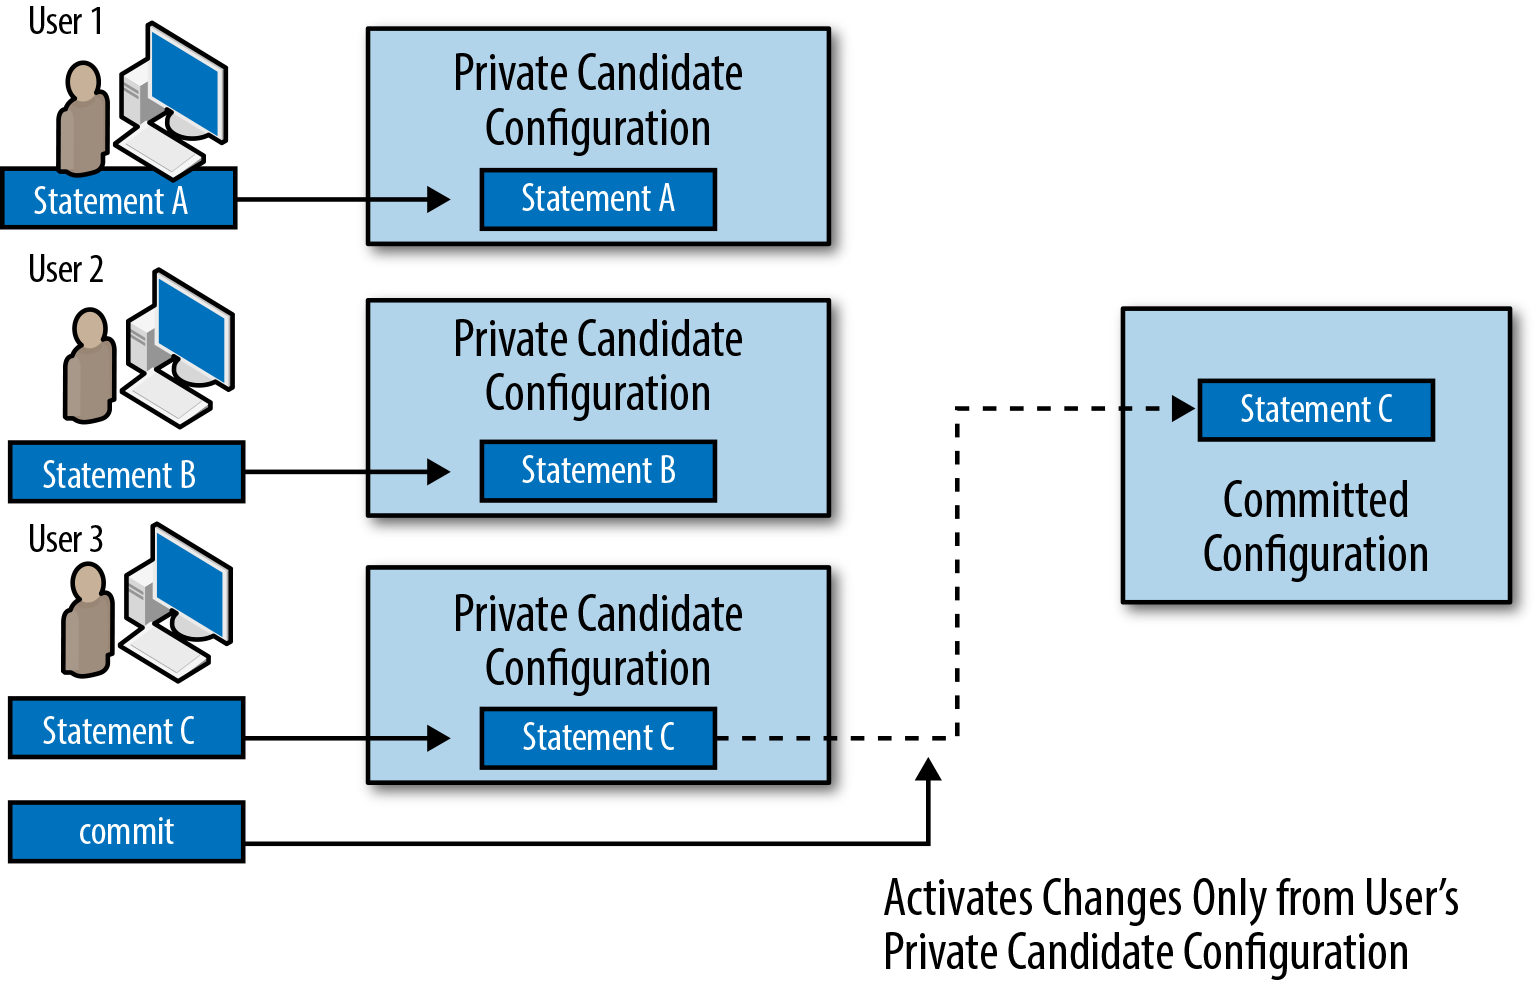 This figure shows multiple users editing private
                candidate configuration databases. Each user's changes go into
                his own database. Each user can commit the changes from her
                database separately.